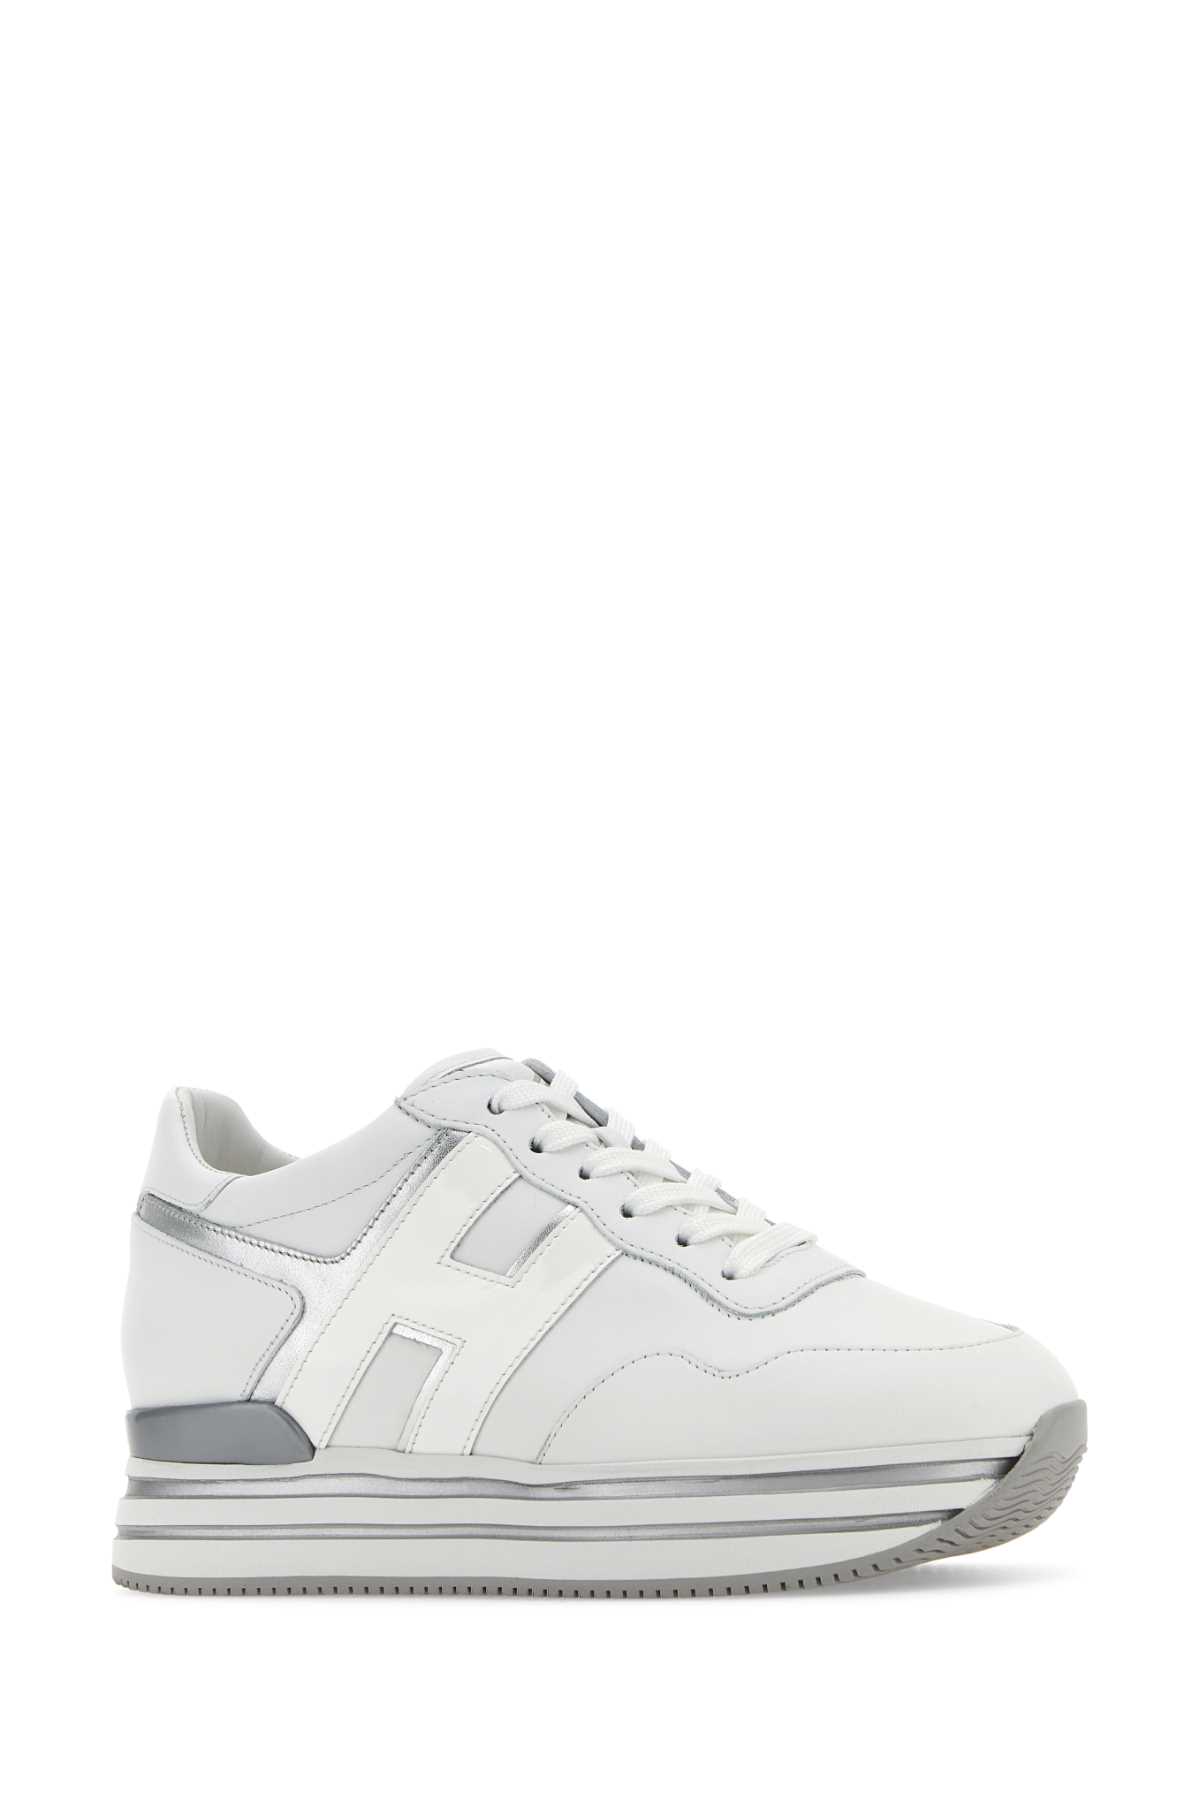 Hogan Two-tone Leather H483 Sneakers In 0351